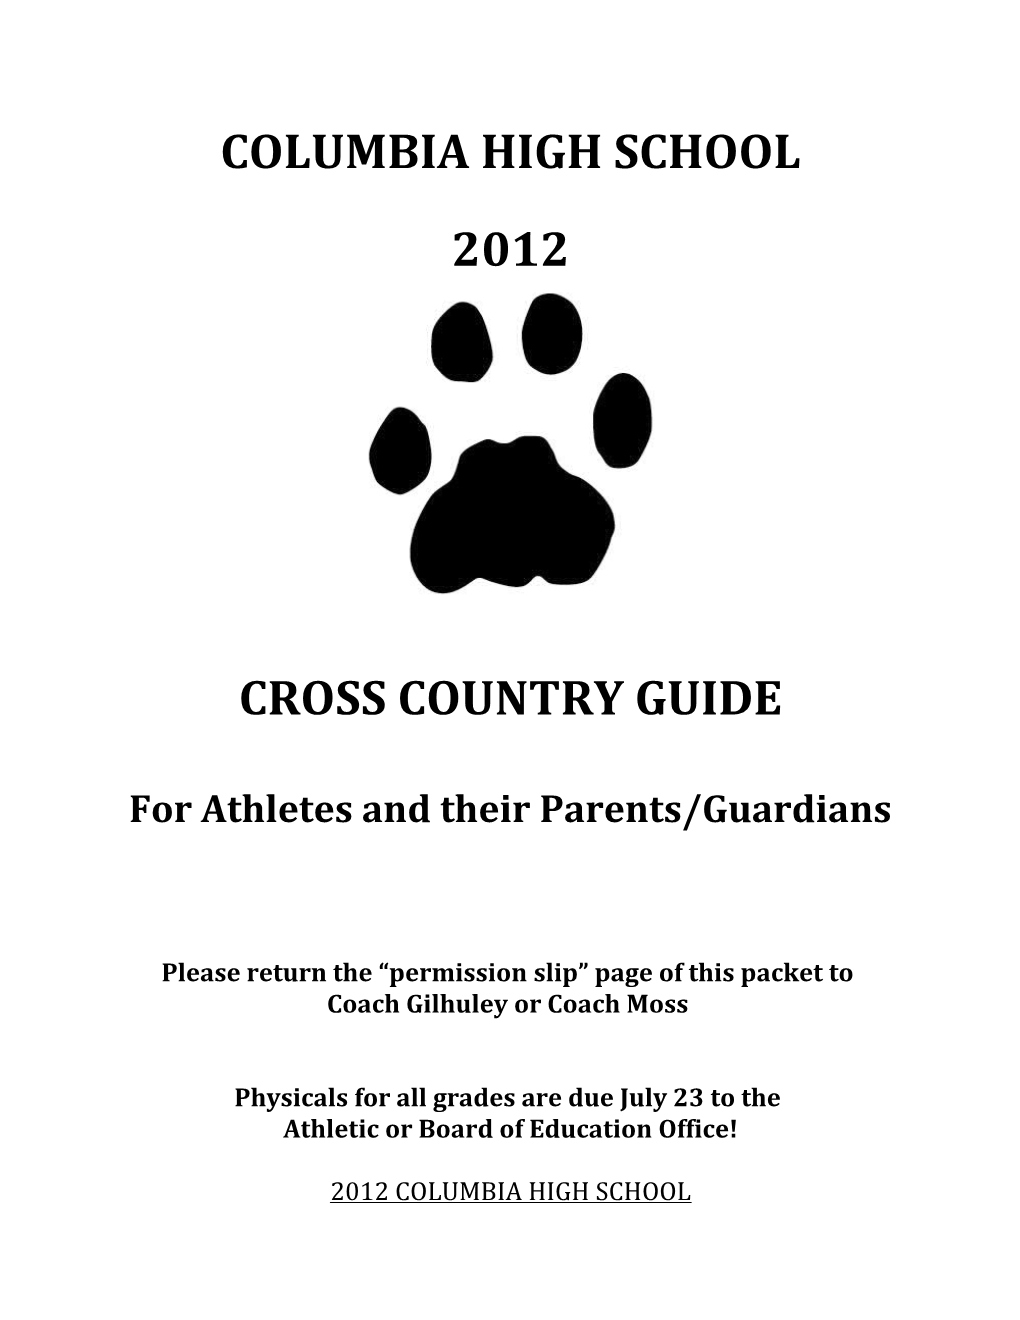 For Athletes and Their Parents/Guardians